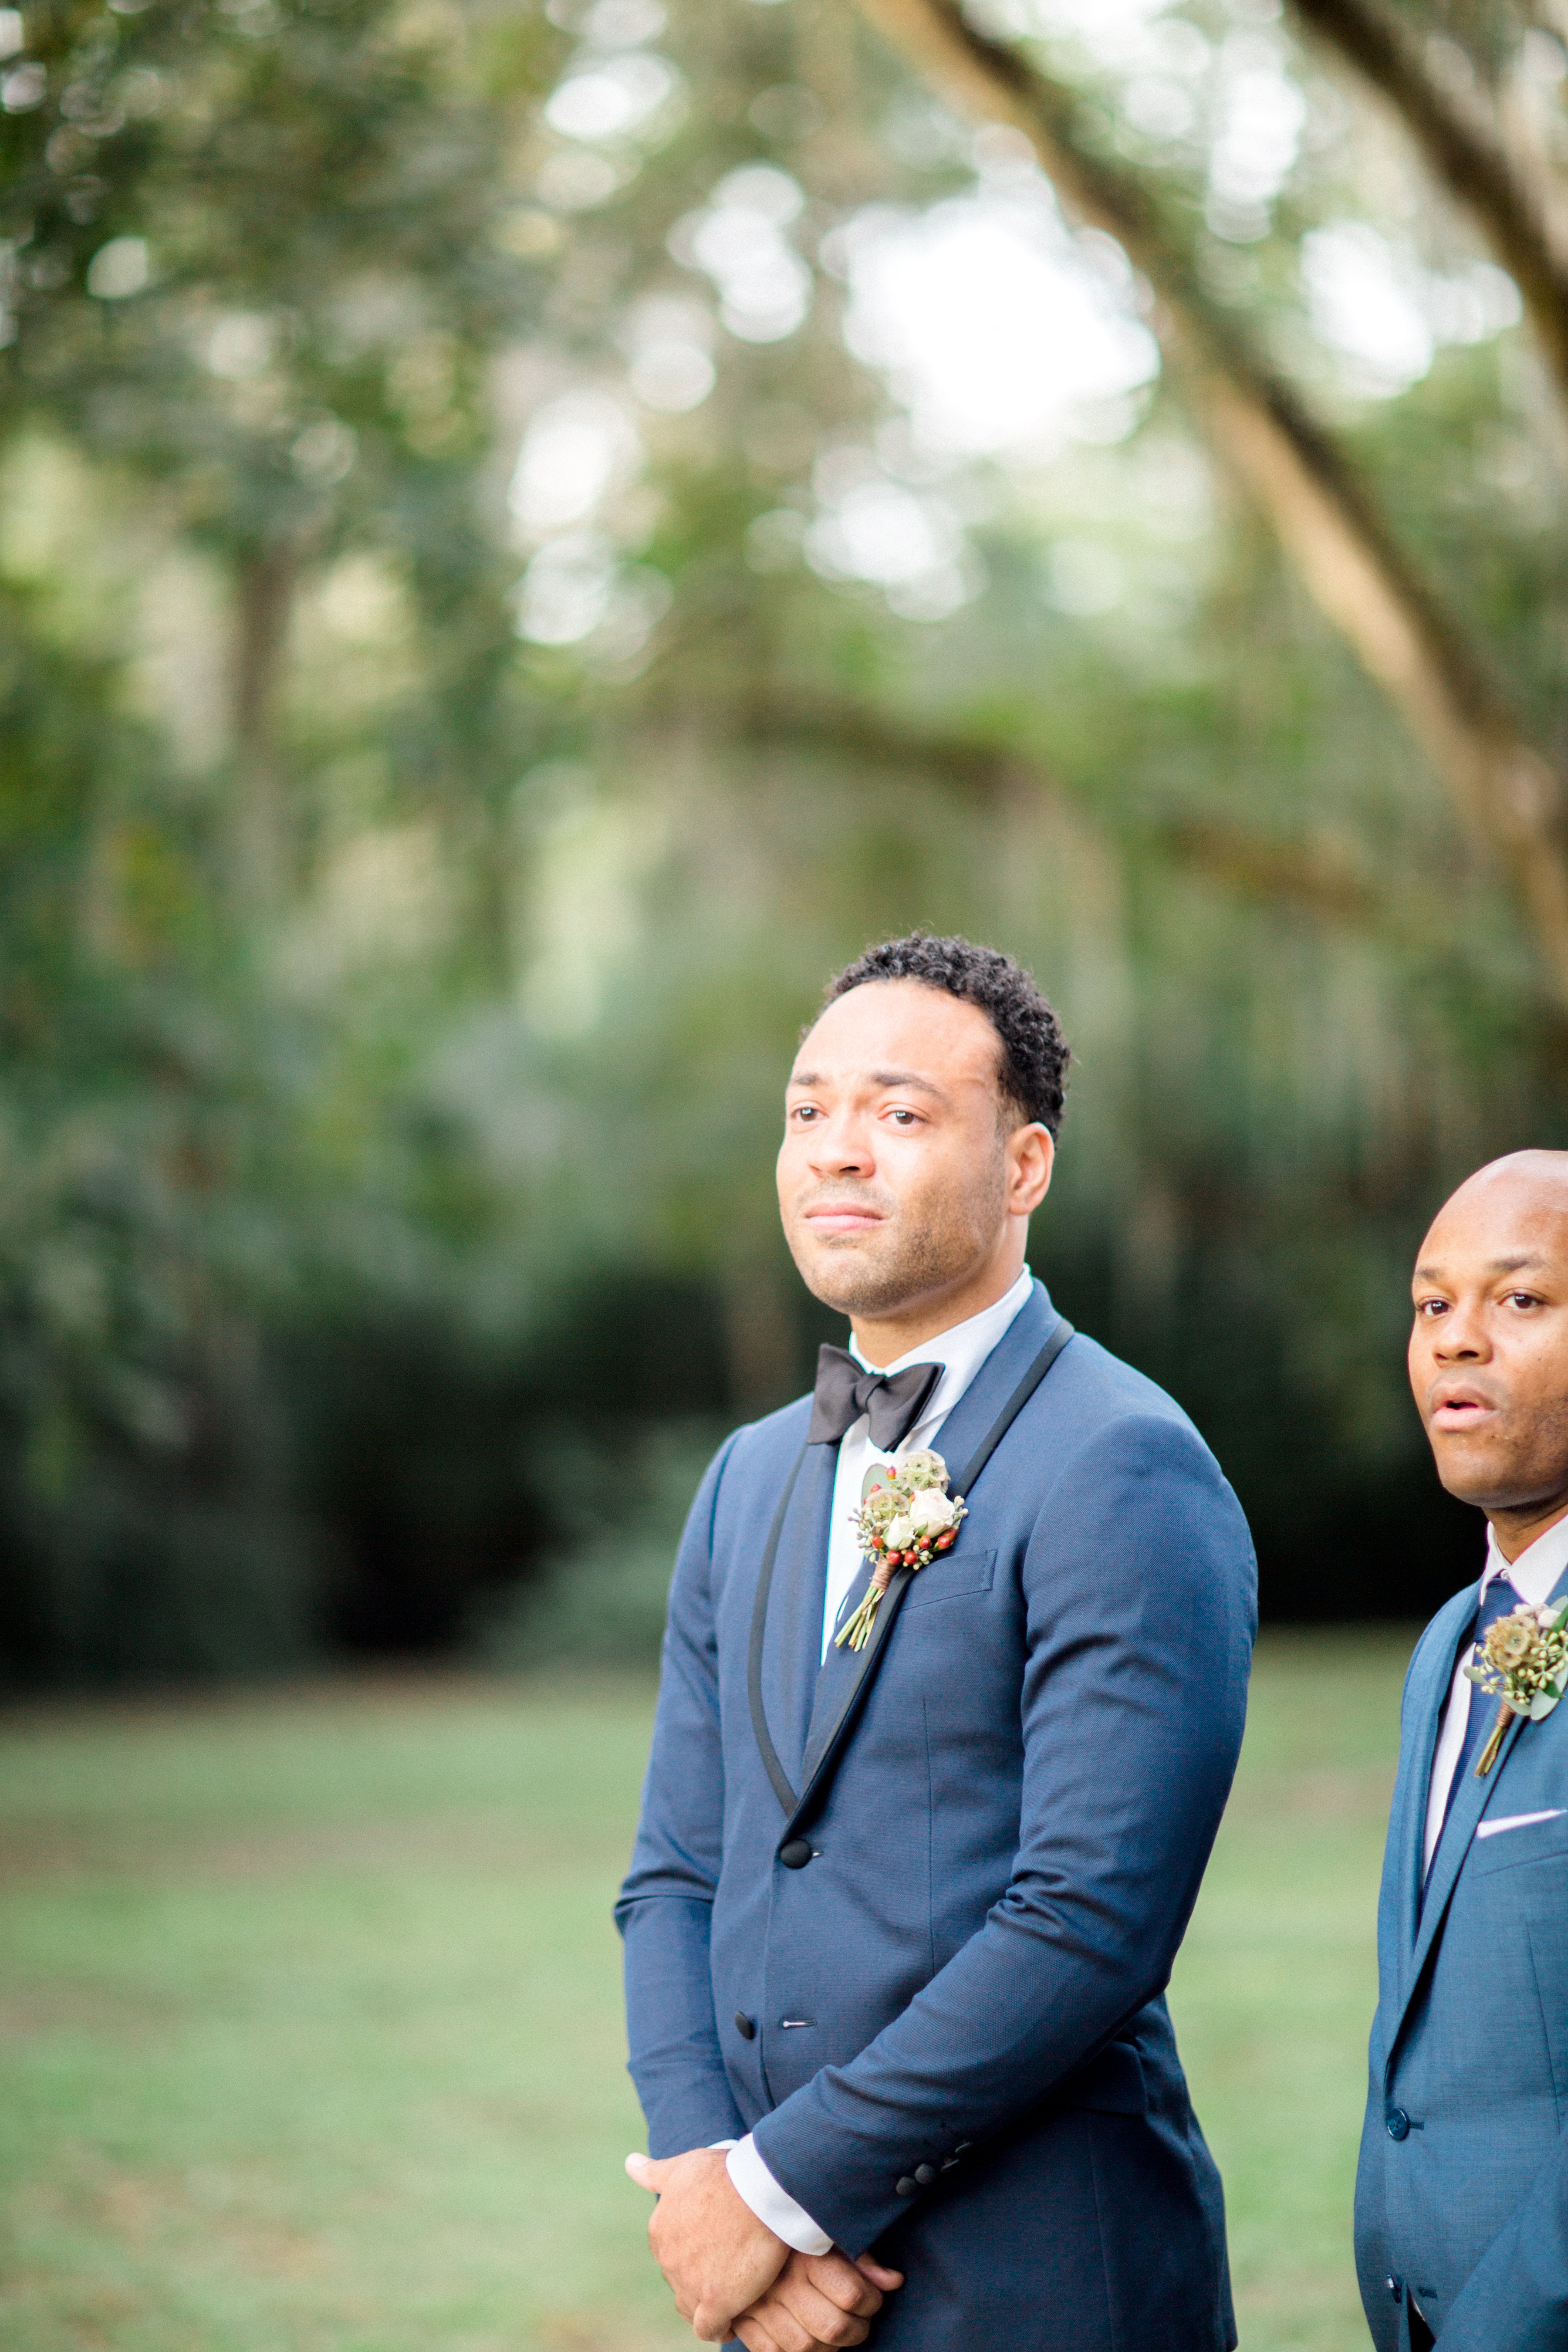 Bridal Bliss: We're Obsessed With Jason And Elena's Charming Southern Wedding Style
